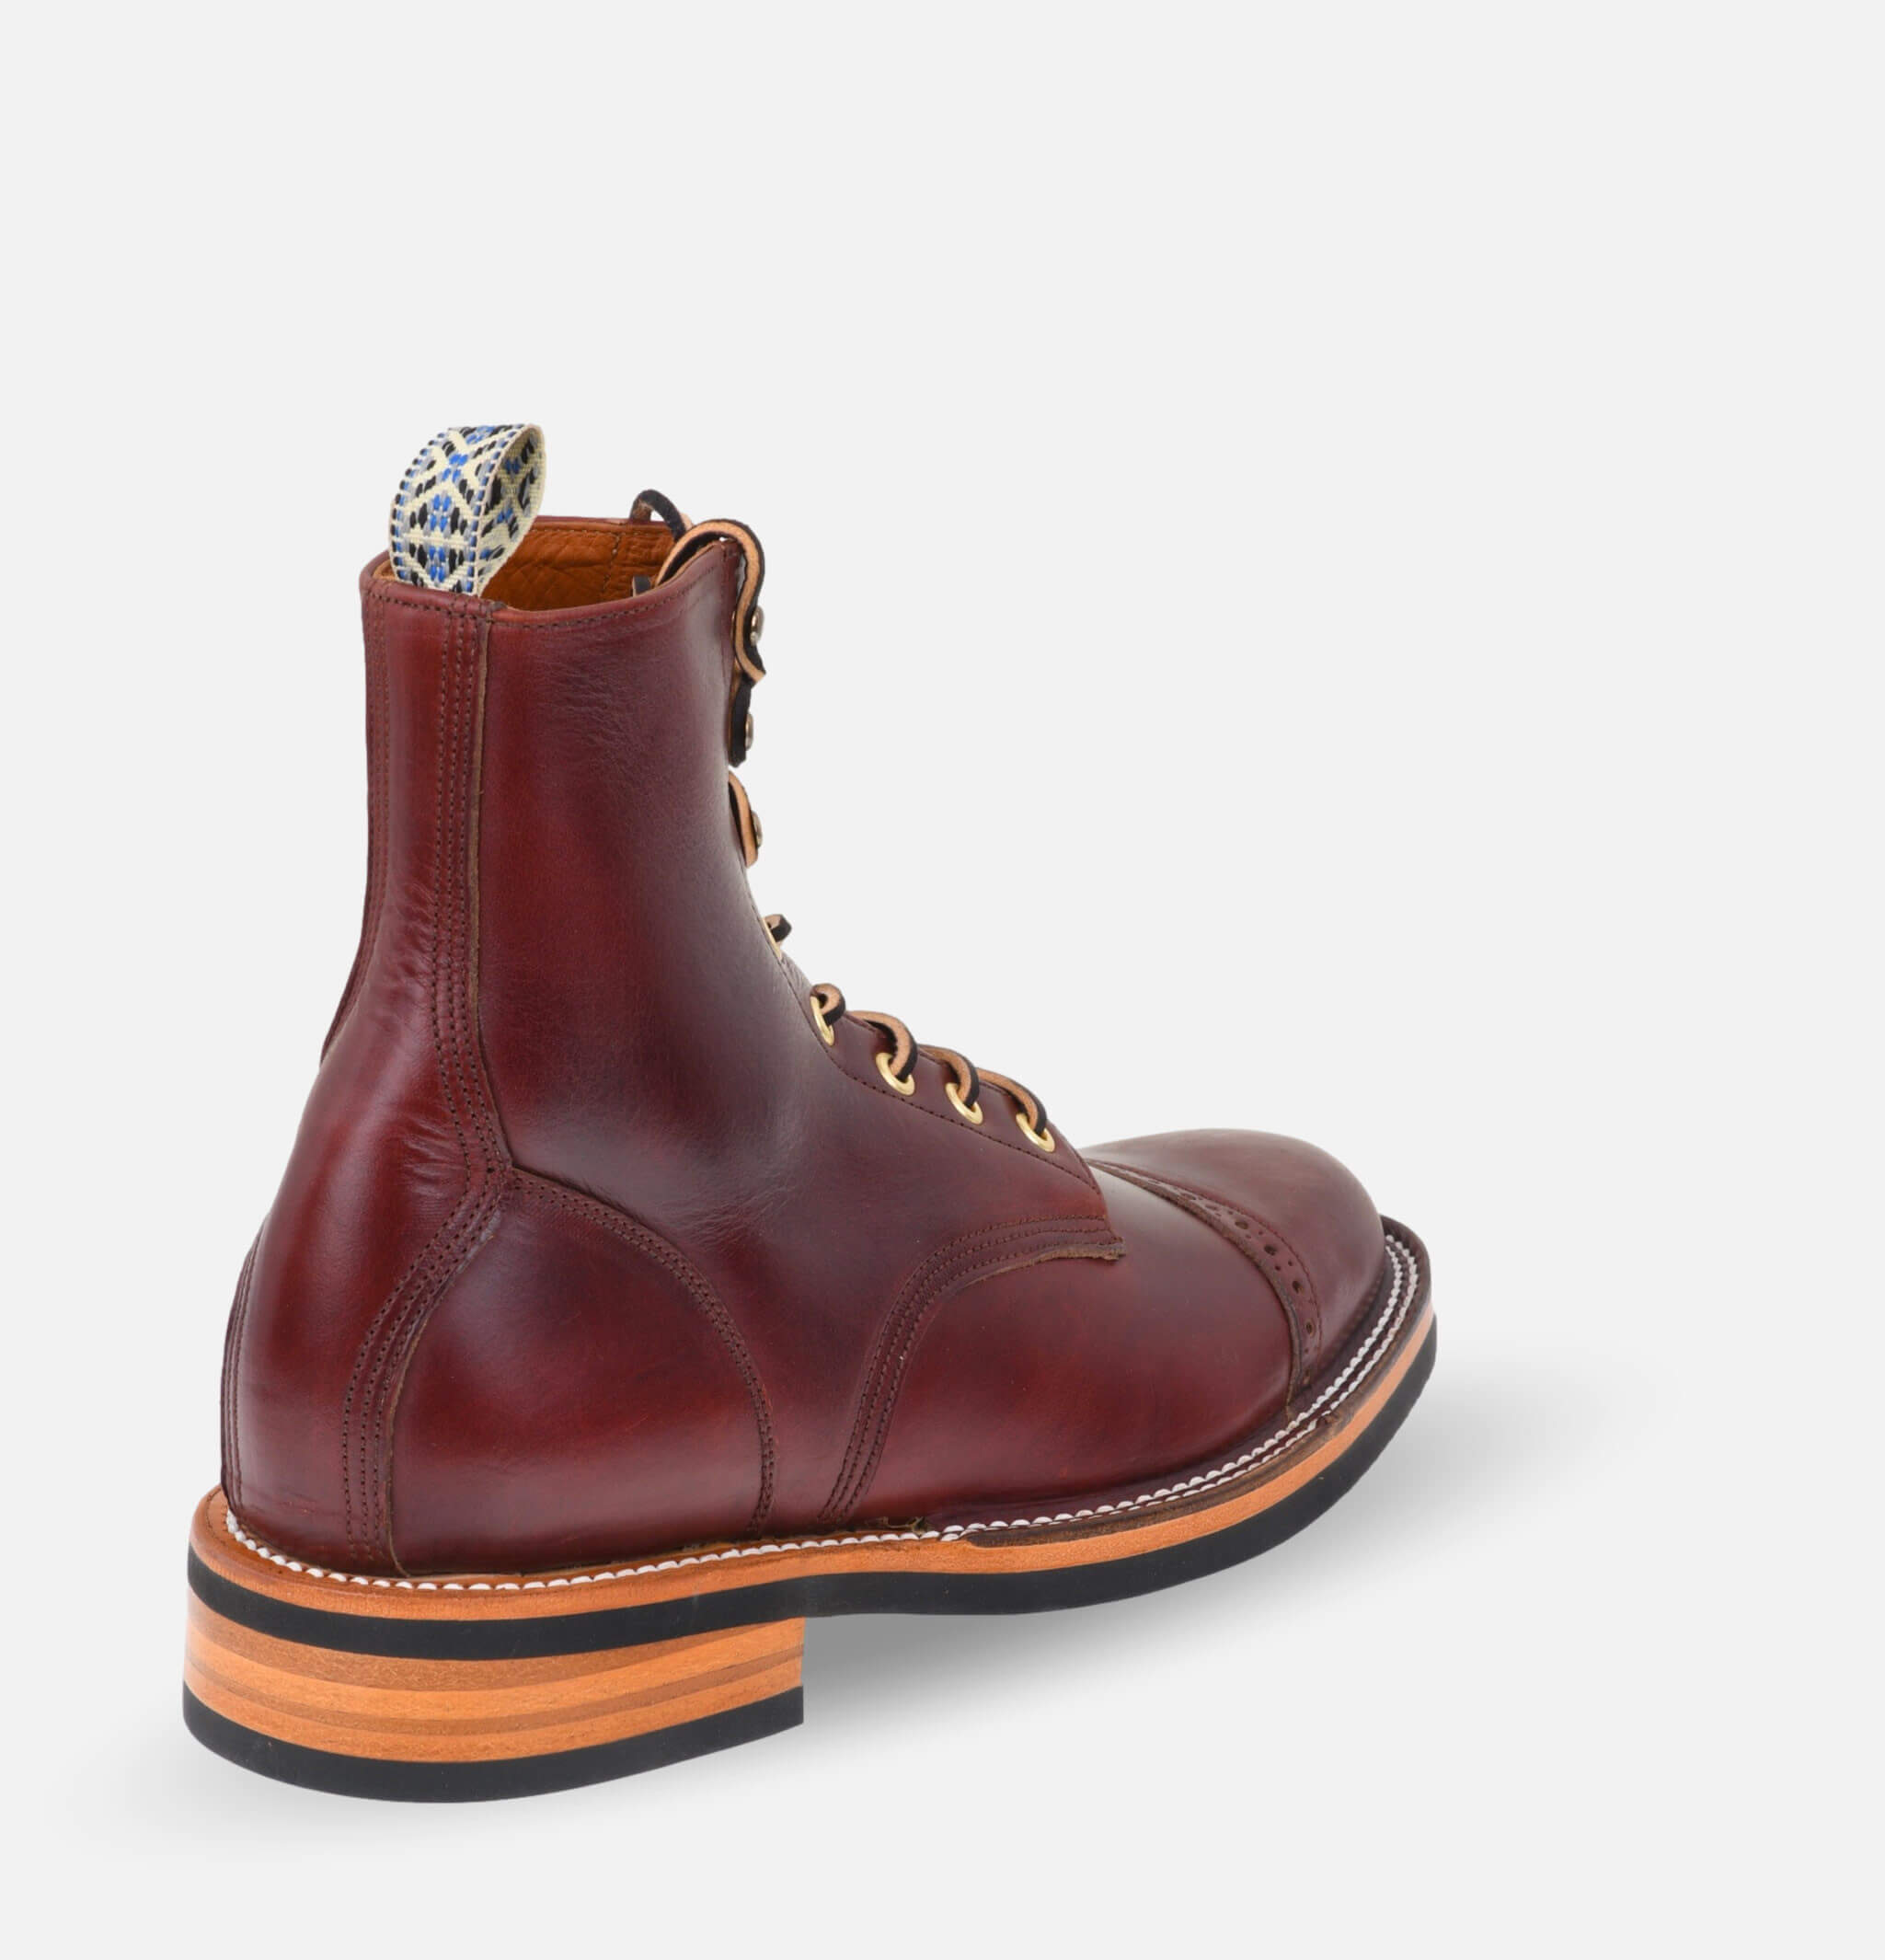 Bottes Unmarked Cap Toe Brown